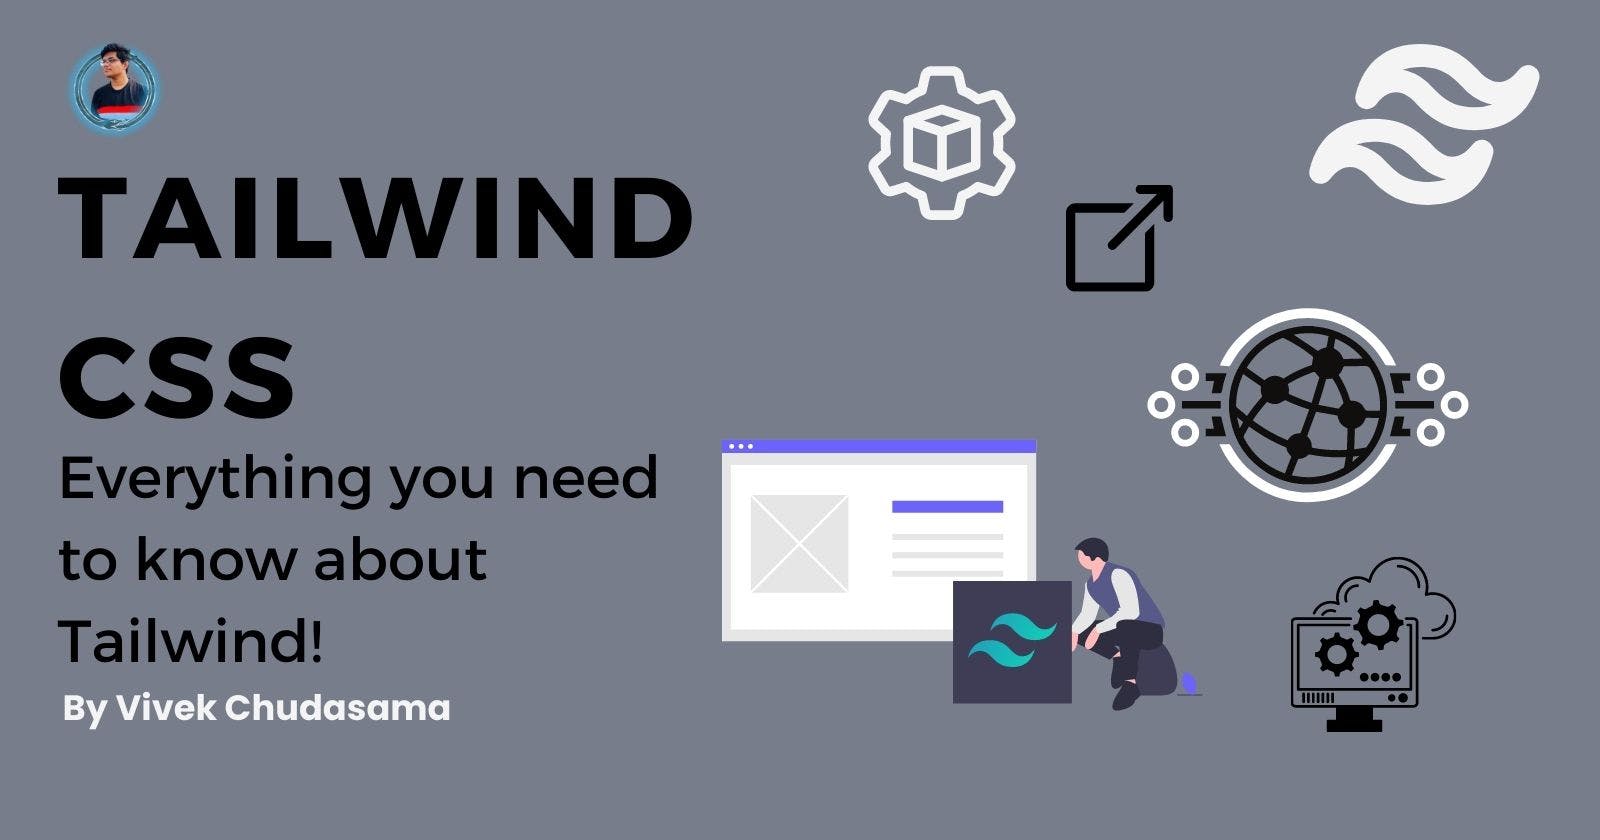 TAILWIND CSS | Everything you need to know about CSS Framework!